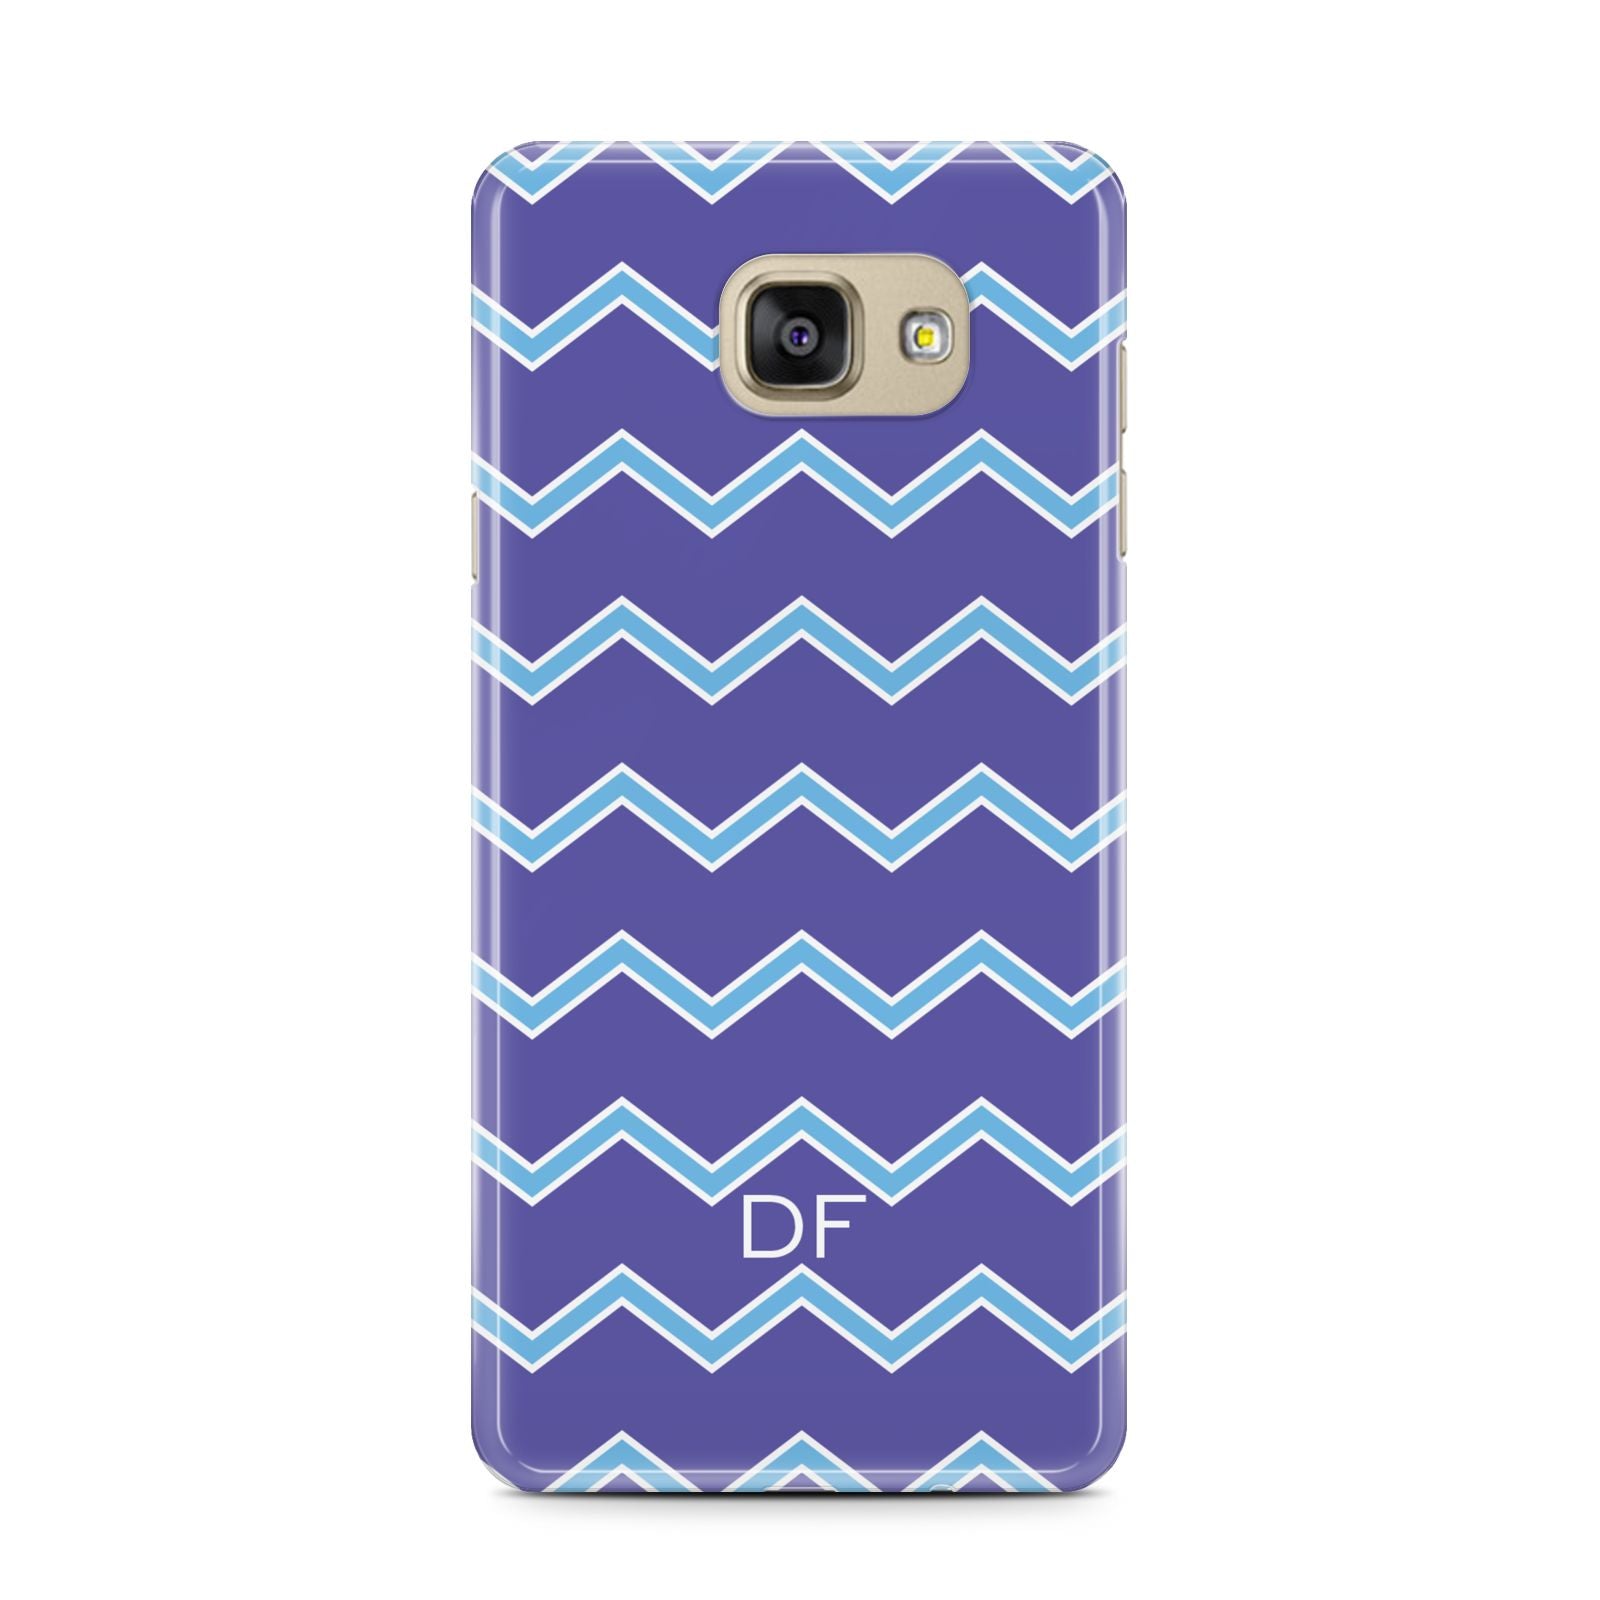 Personalised Chevron 2 Tone Samsung Galaxy A7 2016 Case on gold phone